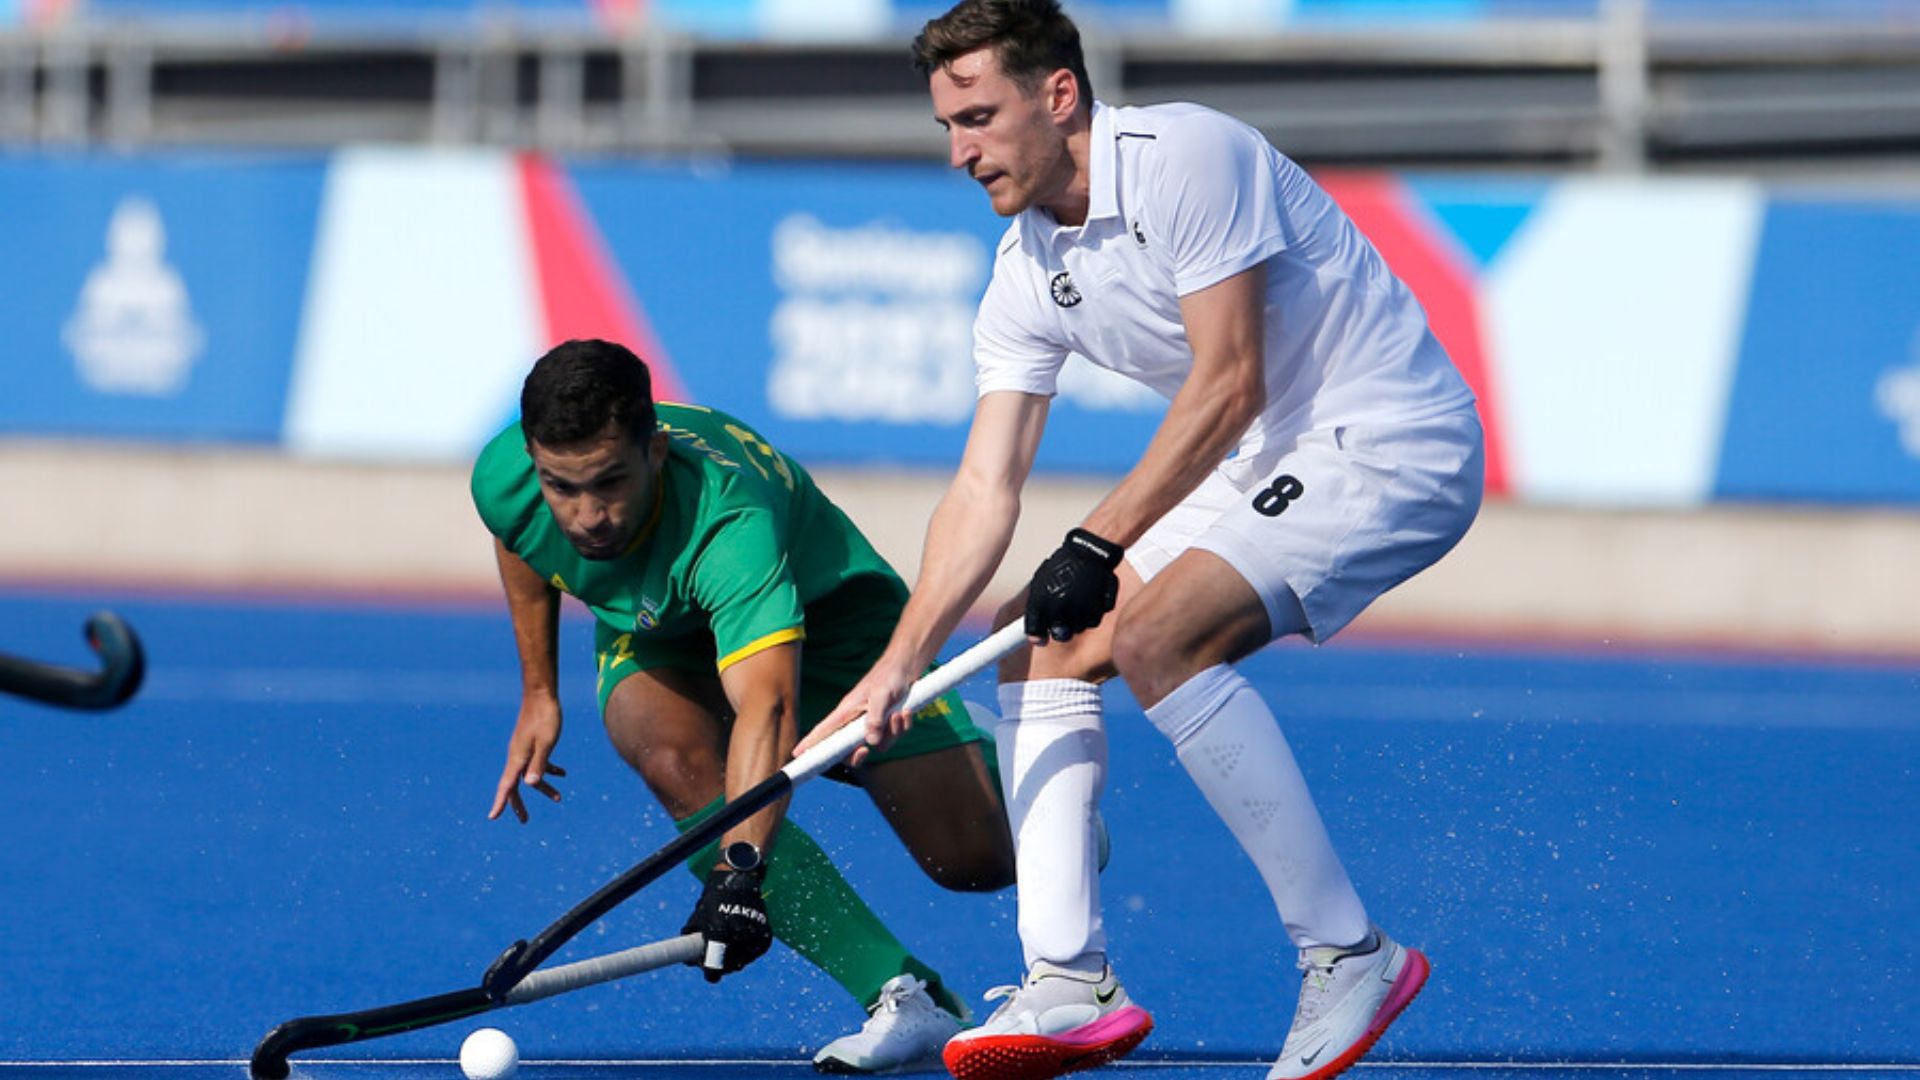 Field Hockey at Santiago 2023 Starts with a Victory for Canada over Brazil